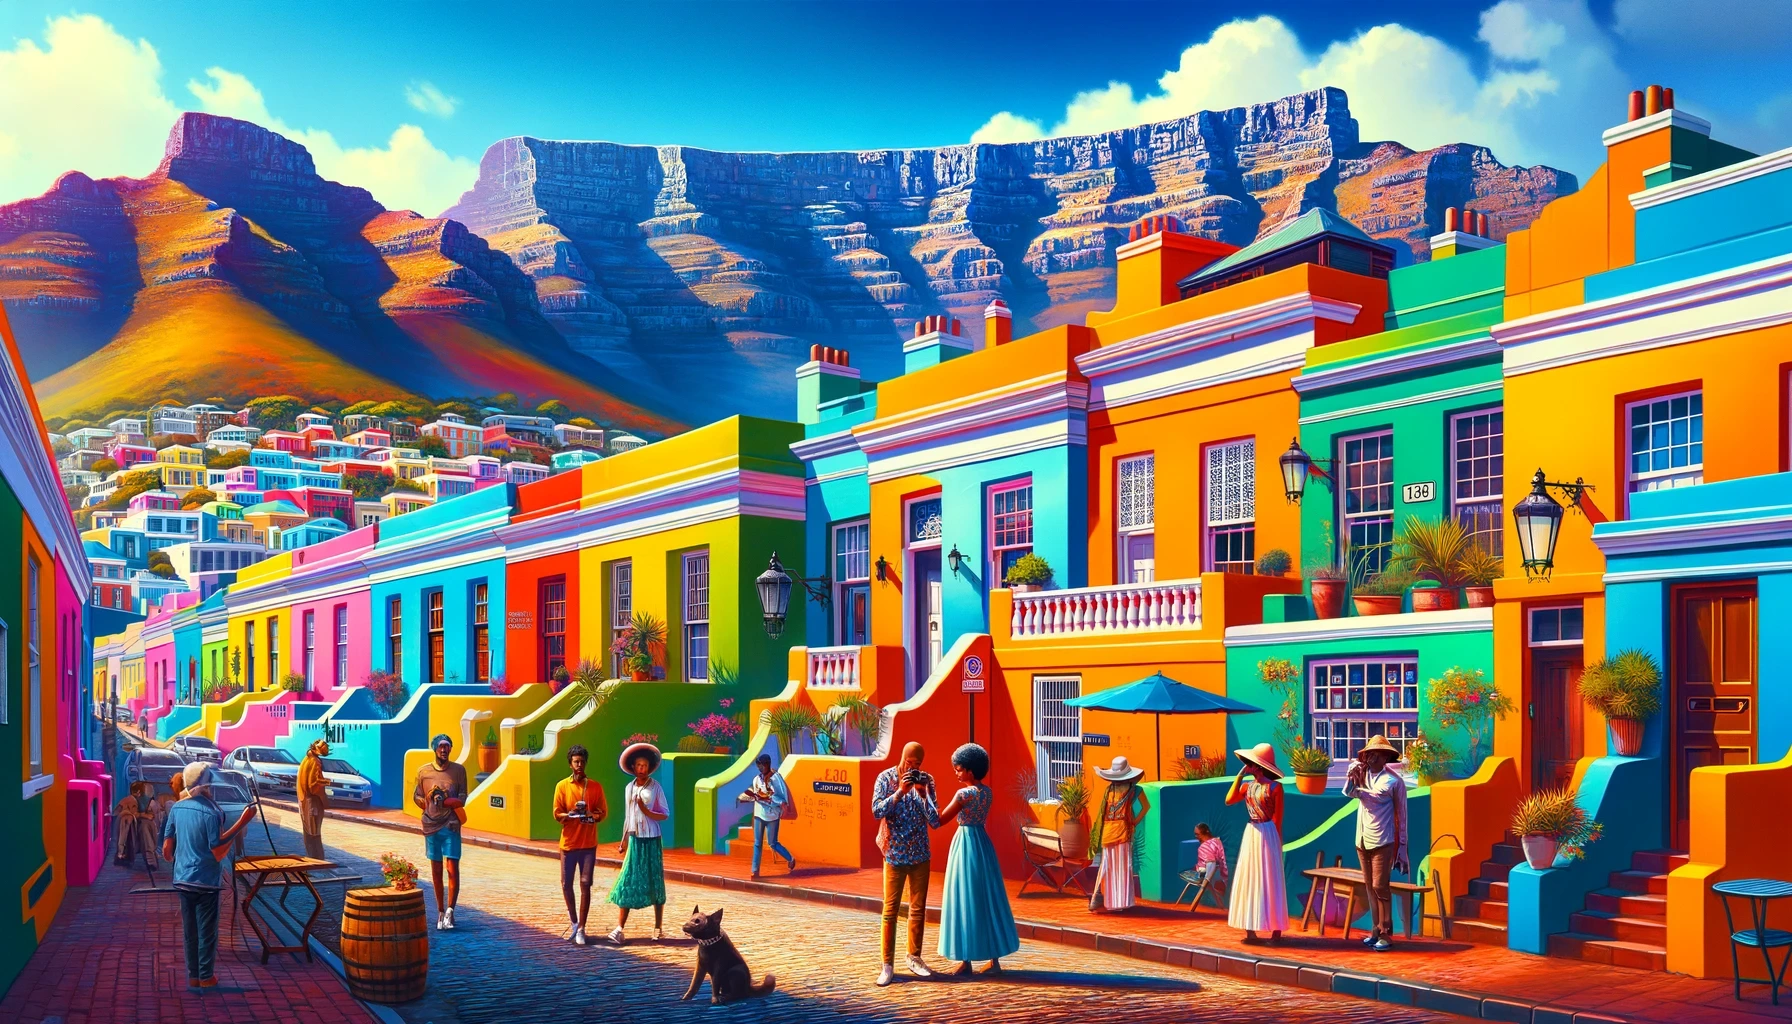 A colorful and vibrant image of Bo-Kaap in Cape Town